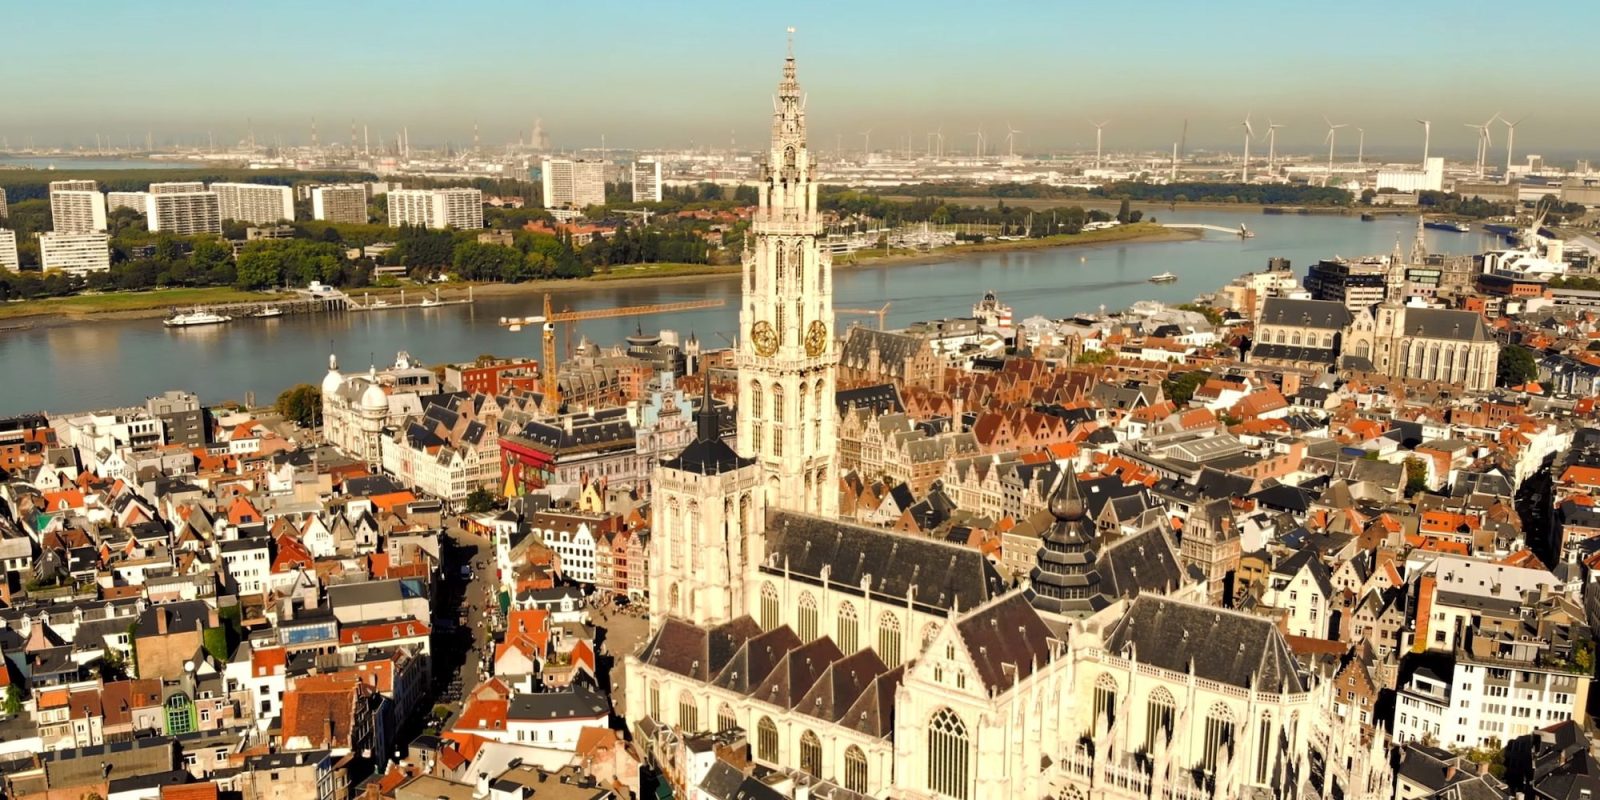 DroneRise - An aerial perspective on the city of Antwerp [4K drone video]